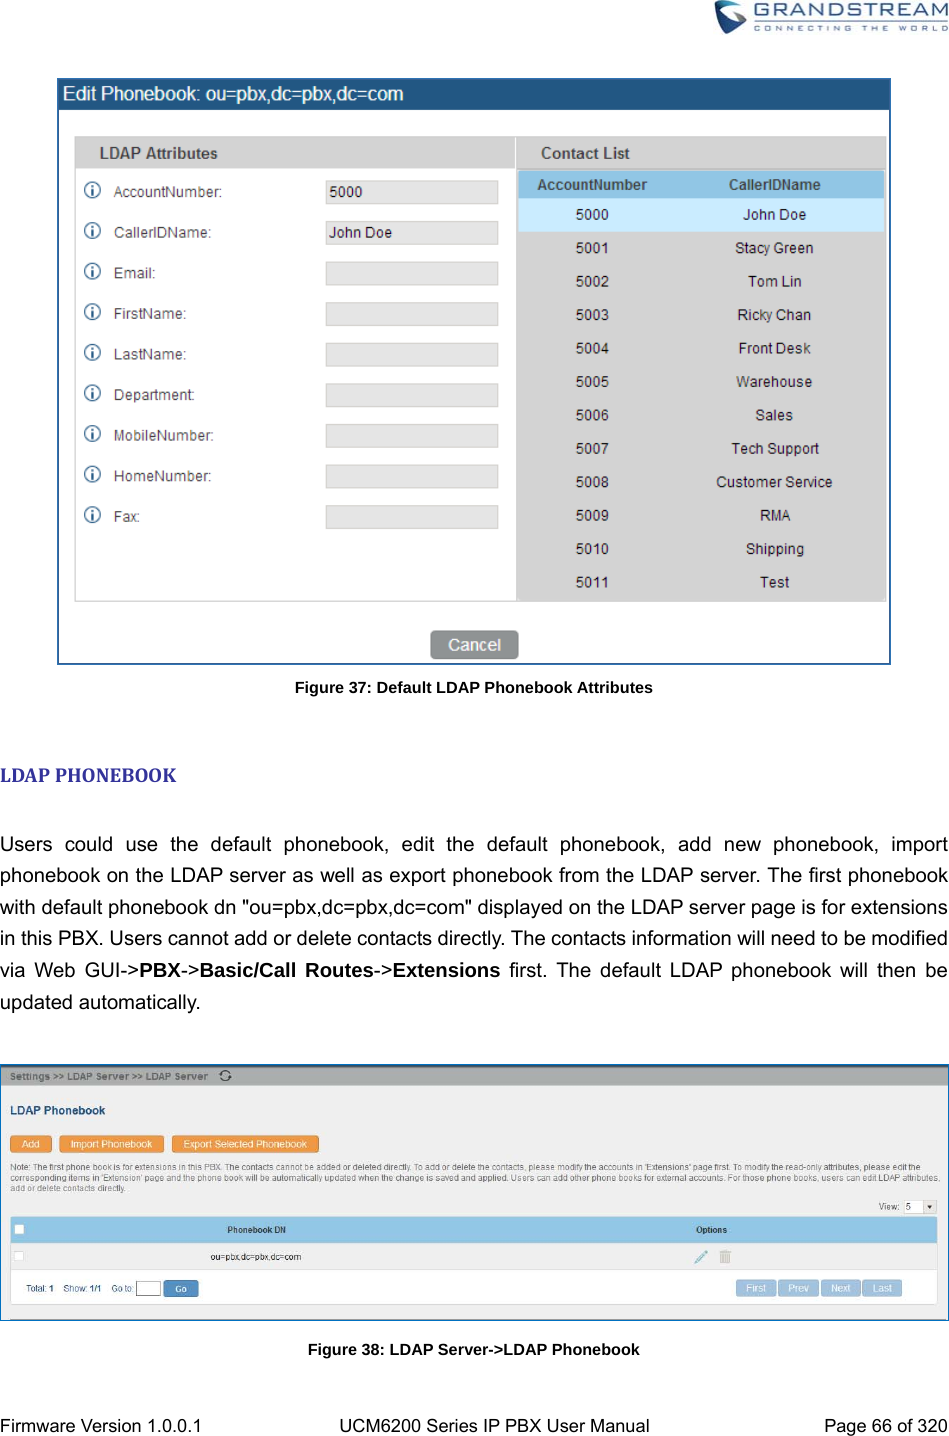  Firmware Version 1.0.0.1  UCM6200 Series IP PBX User Manual  Page 66 of 320  Figure 37: Default LDAP Phonebook Attributes  LDAPPHONEBOOK Users could use the default phonebook, edit the default phonebook, add new phonebook, import phonebook on the LDAP server as well as export phonebook from the LDAP server. The first phonebook with default phonebook dn &quot;ou=pbx,dc=pbx,dc=com&quot; displayed on the LDAP server page is for extensions in this PBX. Users cannot add or delete contacts directly. The contacts information will need to be modified via Web GUI-&gt;PBX-&gt;Basic/Call Routes-&gt;Extensions first. The default LDAP phonebook will then be updated automatically.   Figure 38: LDAP Server-&gt;LDAP Phonebook 